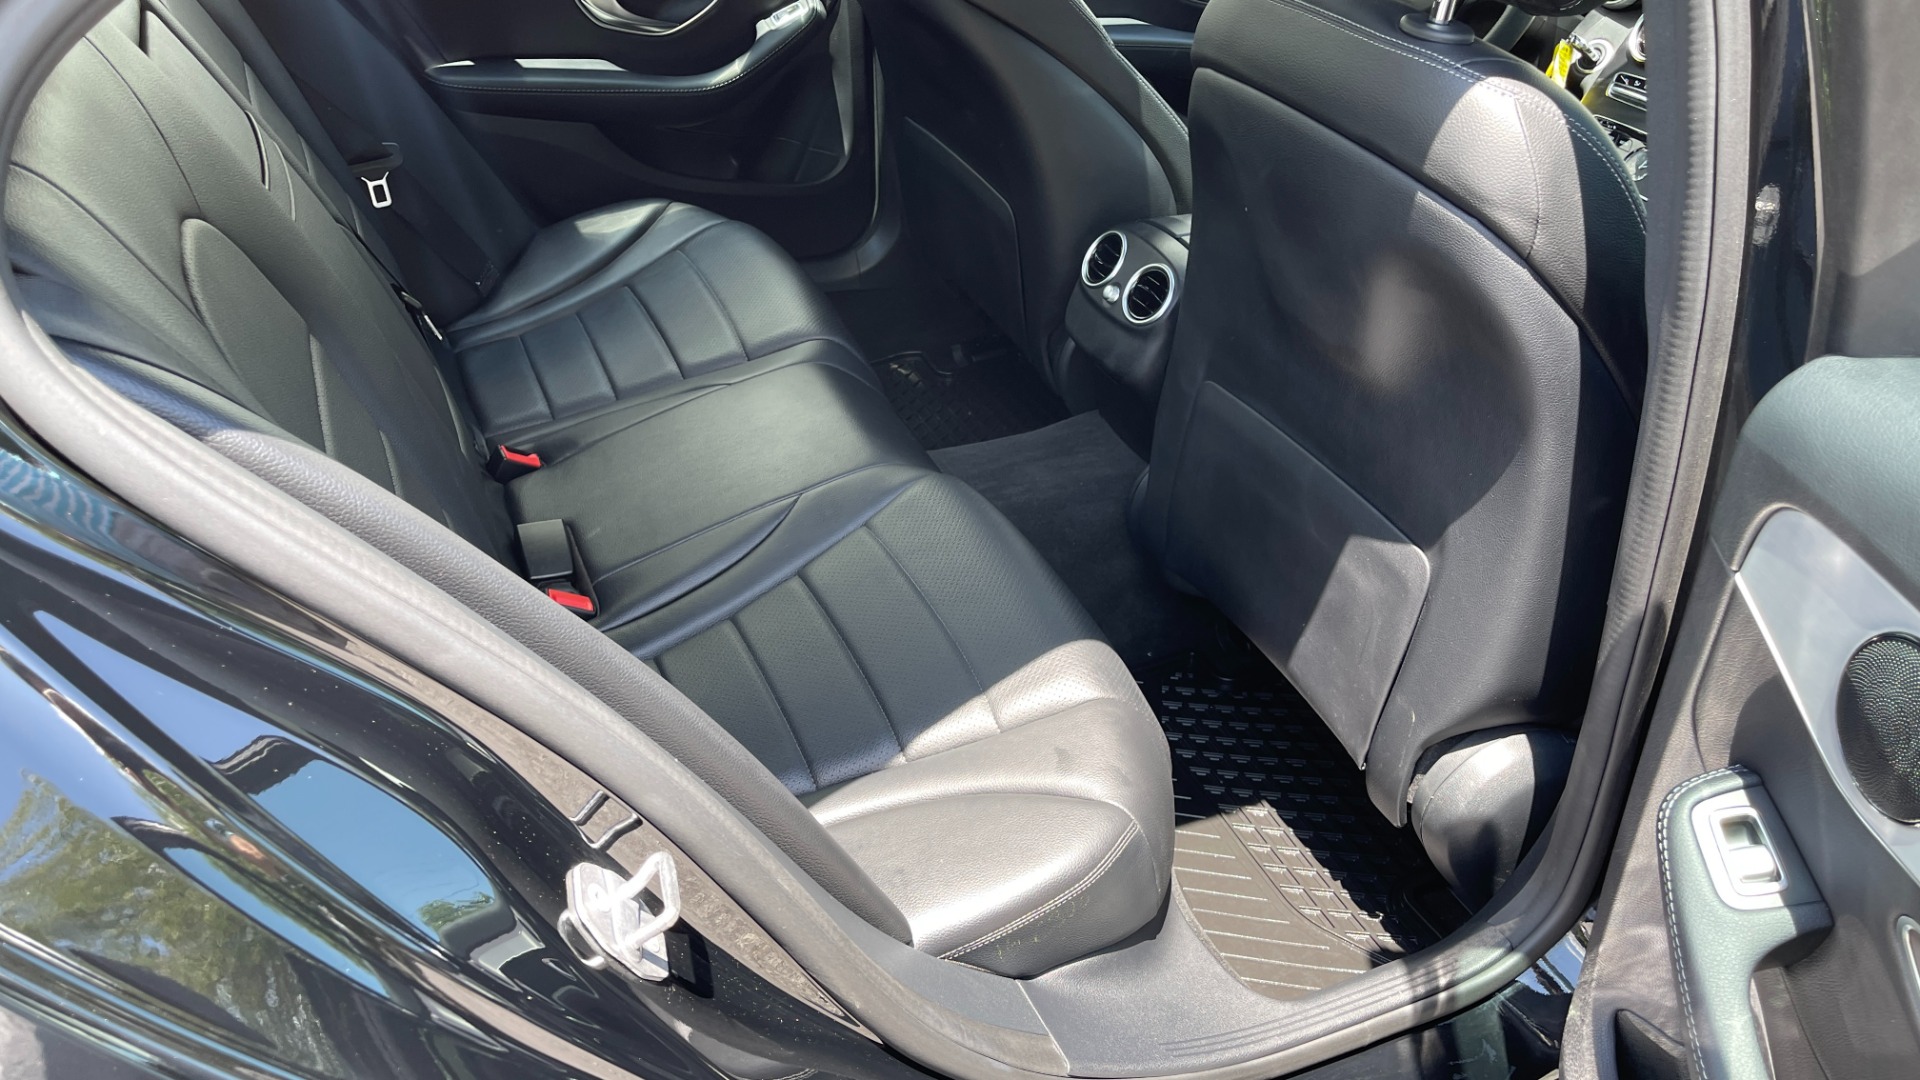 Used 2018 Mercedes-Benz C-Class C 300 / PREMIUM / REVIEW CAM / HTD SEATS / 18IN WHEELS for sale $27,999 at Formula Imports in Charlotte NC 28227 12